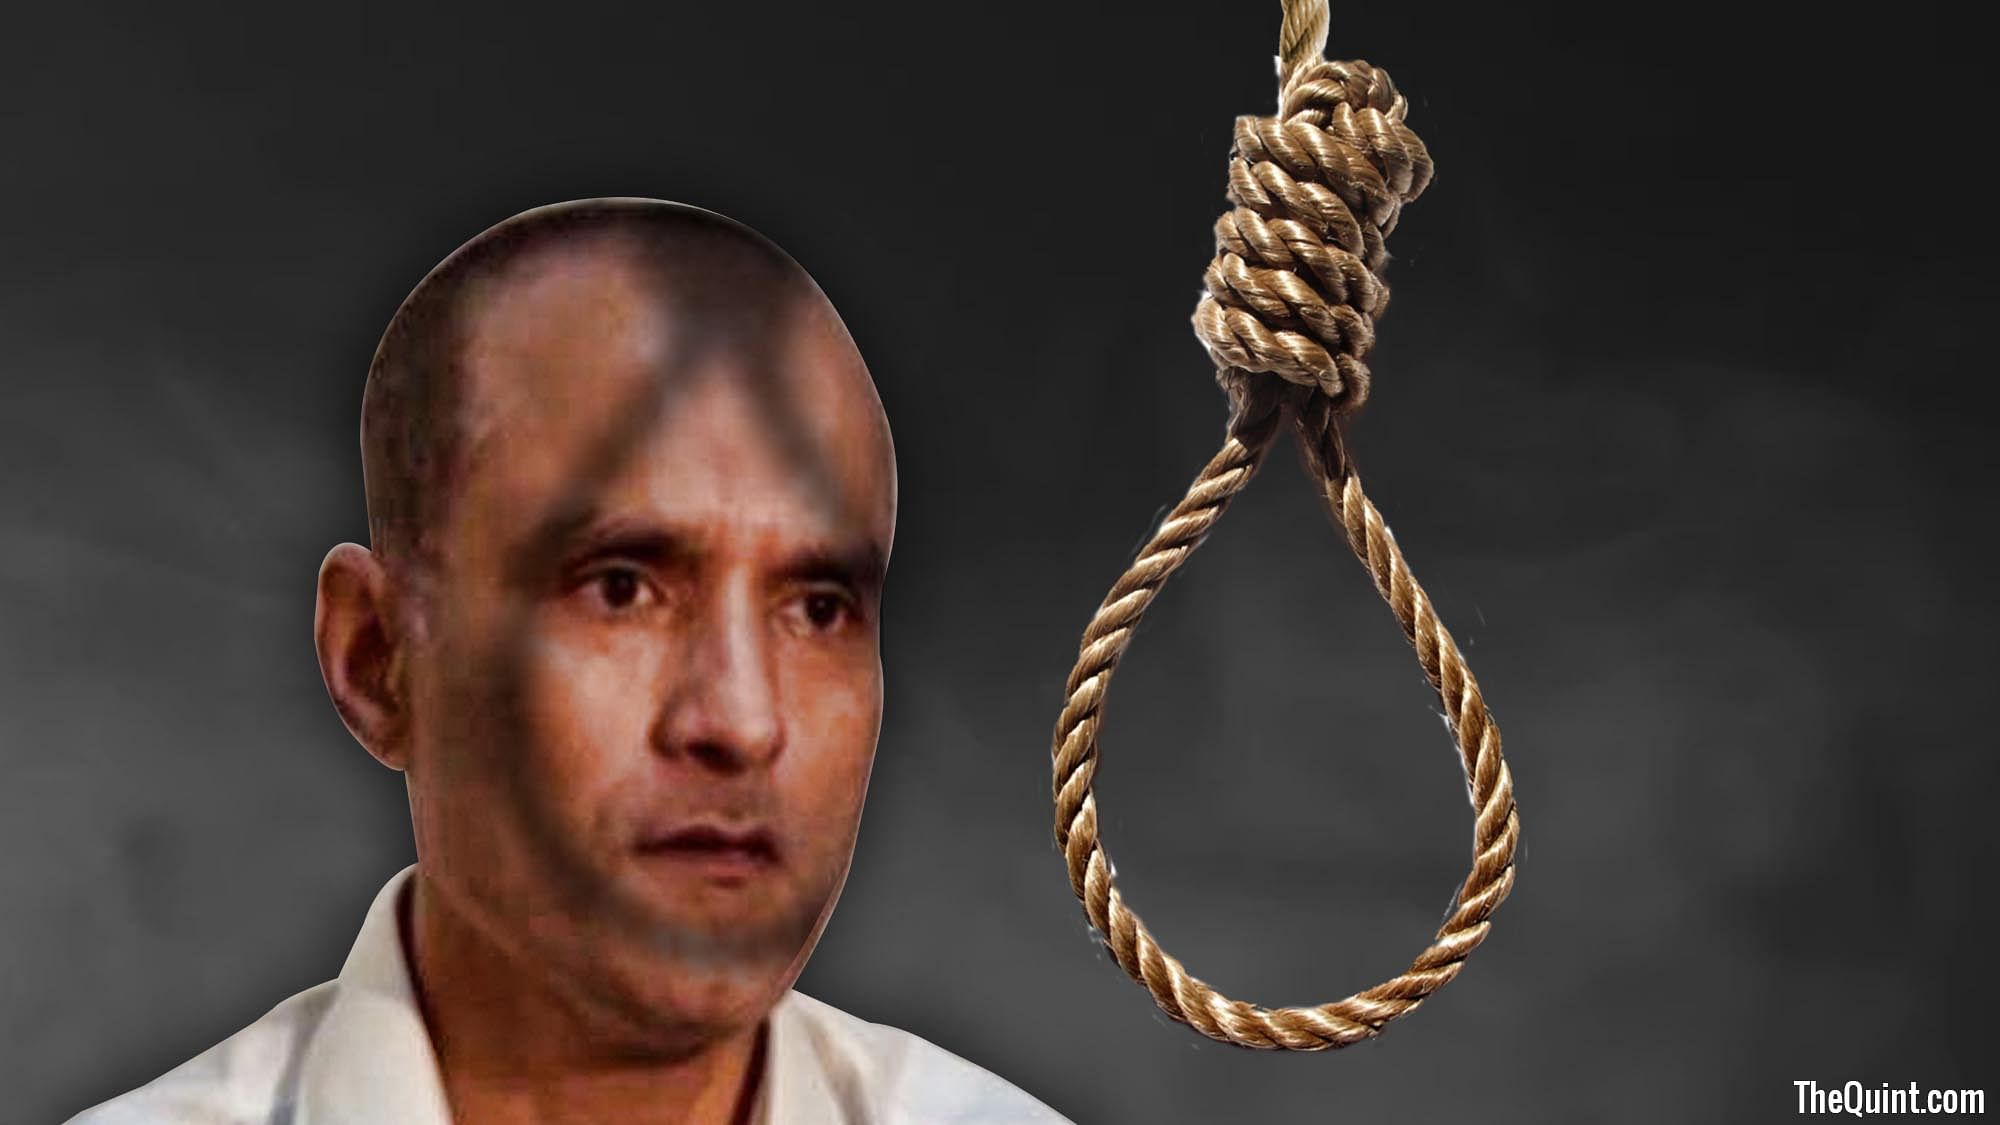 Kulbhushan Jadhav, who Islamabad alleges is a RAW spy, was on Monday given the death sentence by a Pakistani military court. (Photo: <b>The Quint</b>)